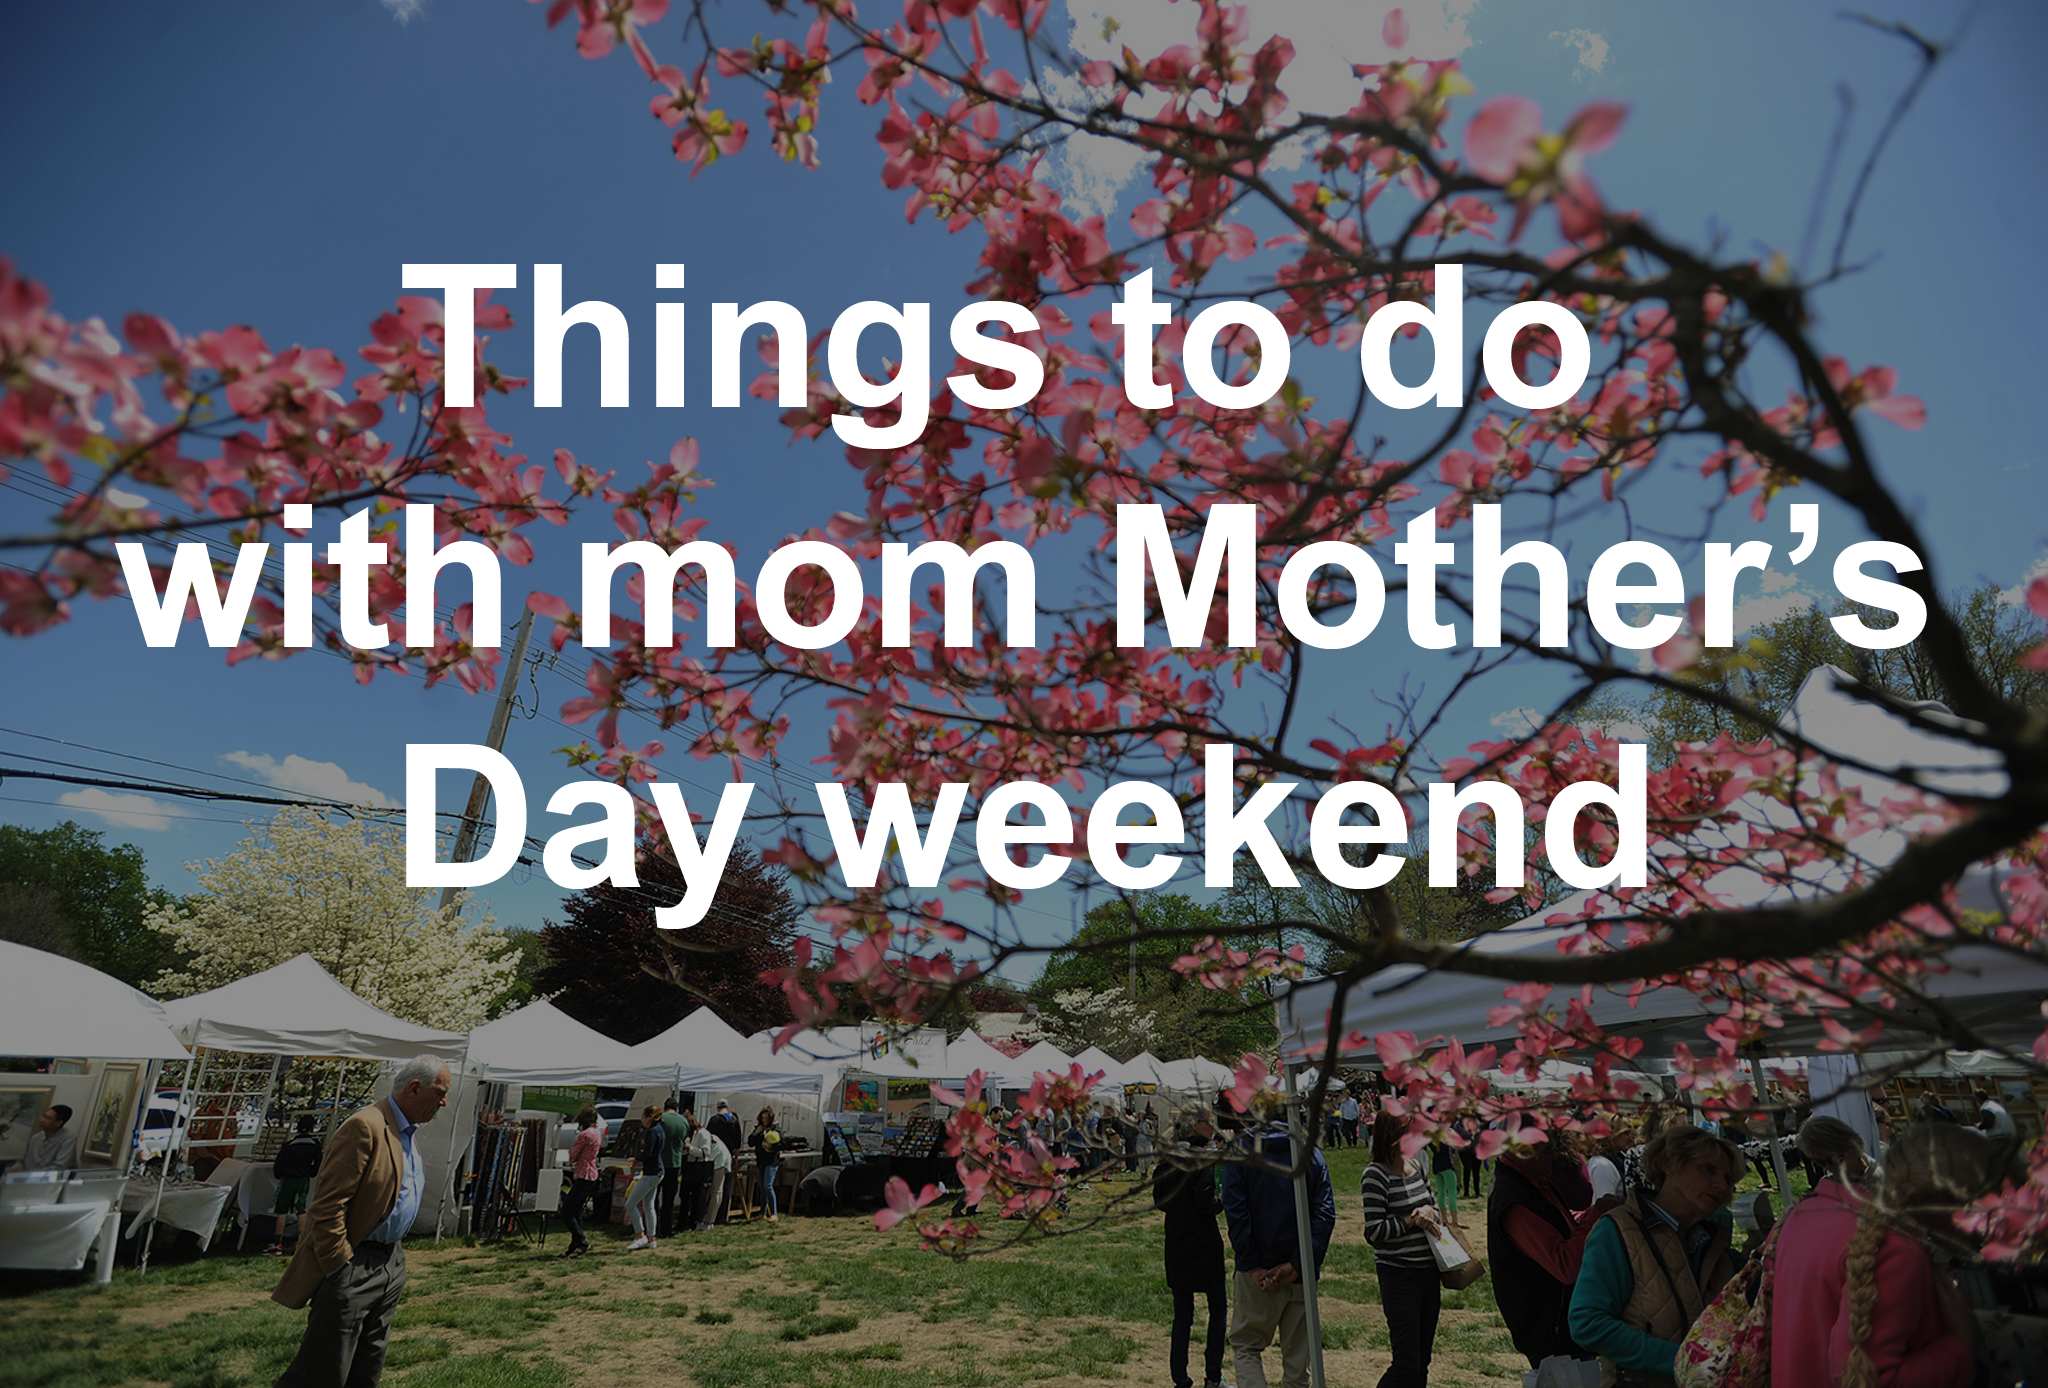 Things to do with mom on Mother's Day weekend in Connecticut